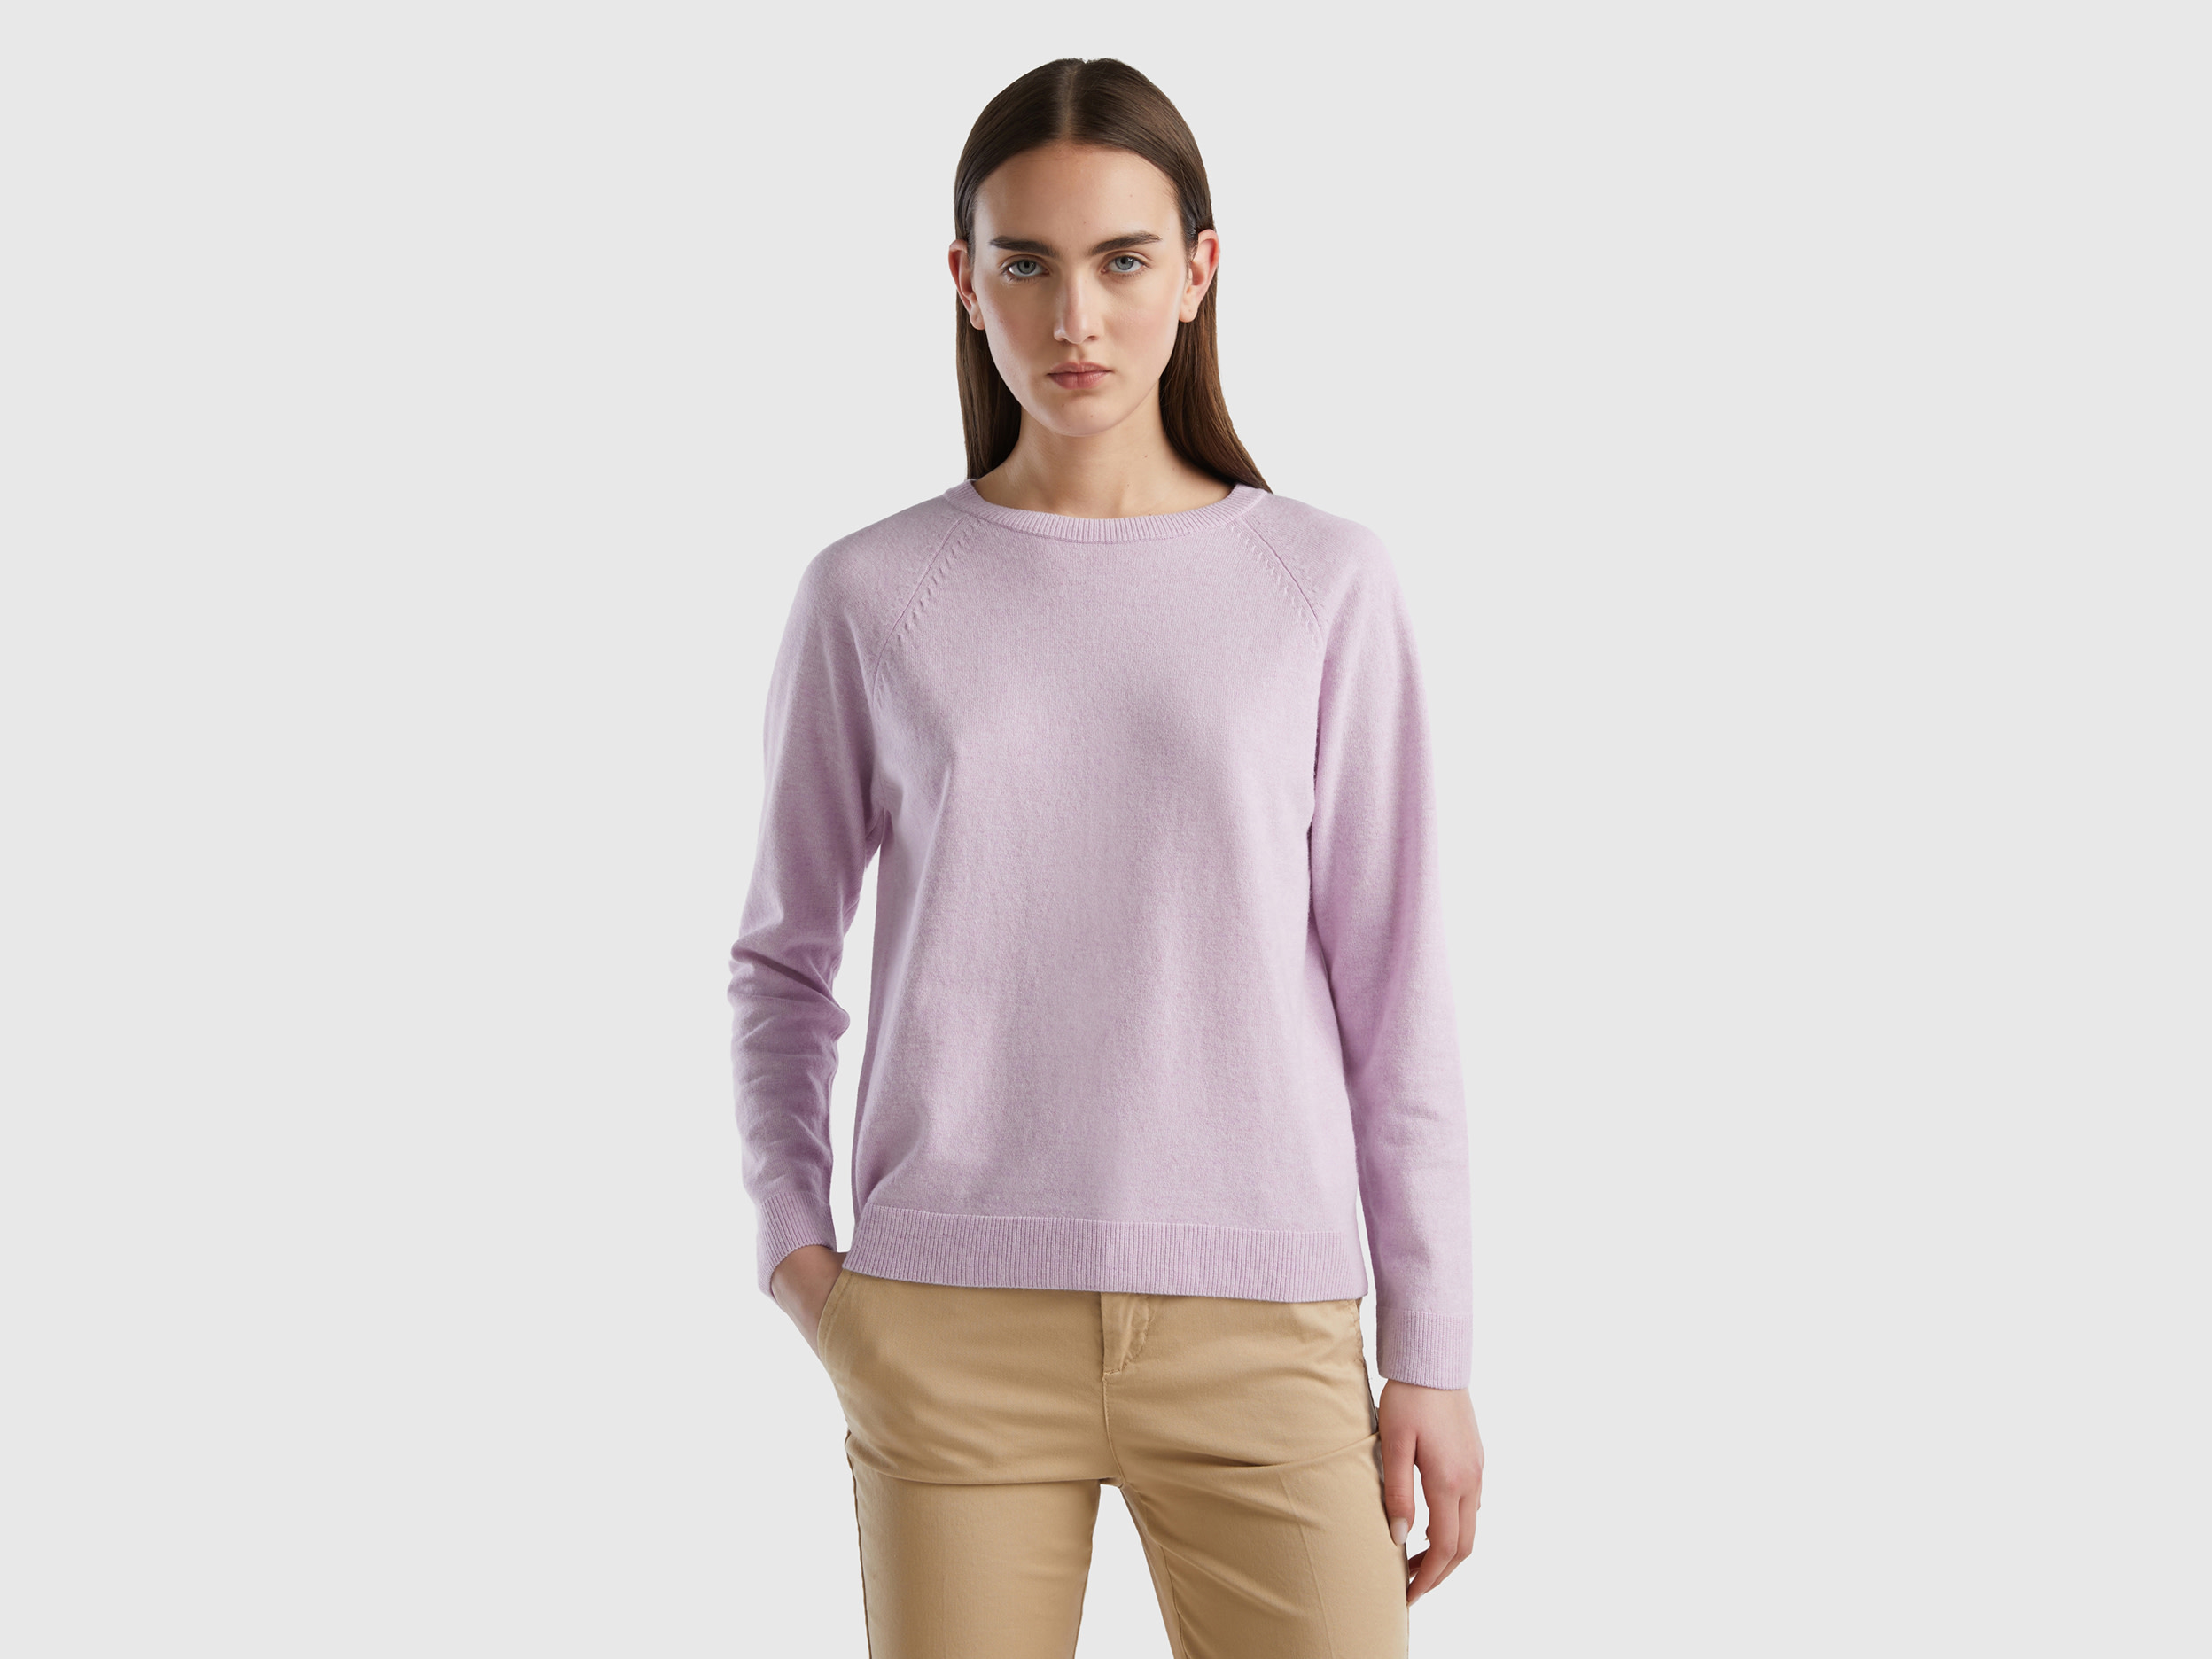 Benetton, Light Lilac Crew Neck Sweater In Cashmere And Wool Blend, size M, Lilac, Women